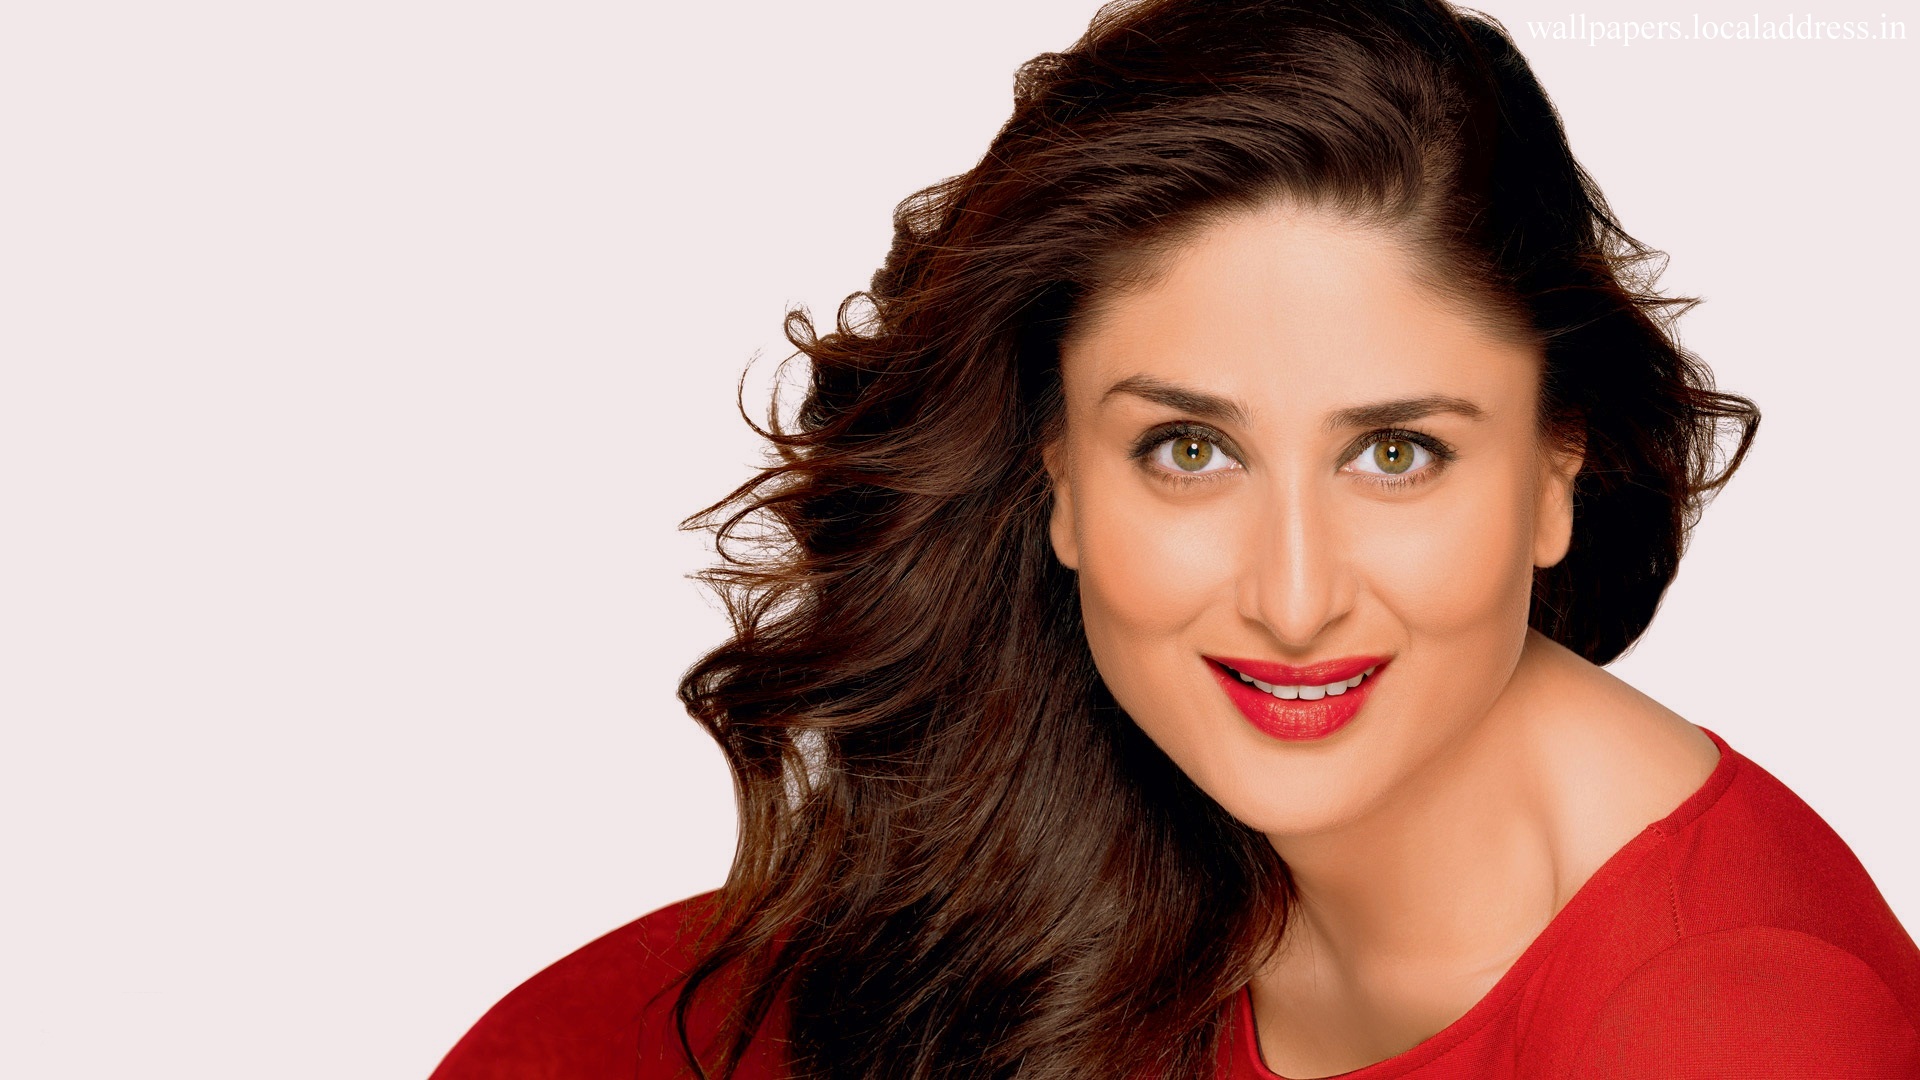 She's going to rock the industry: Kareena on Sara's debut